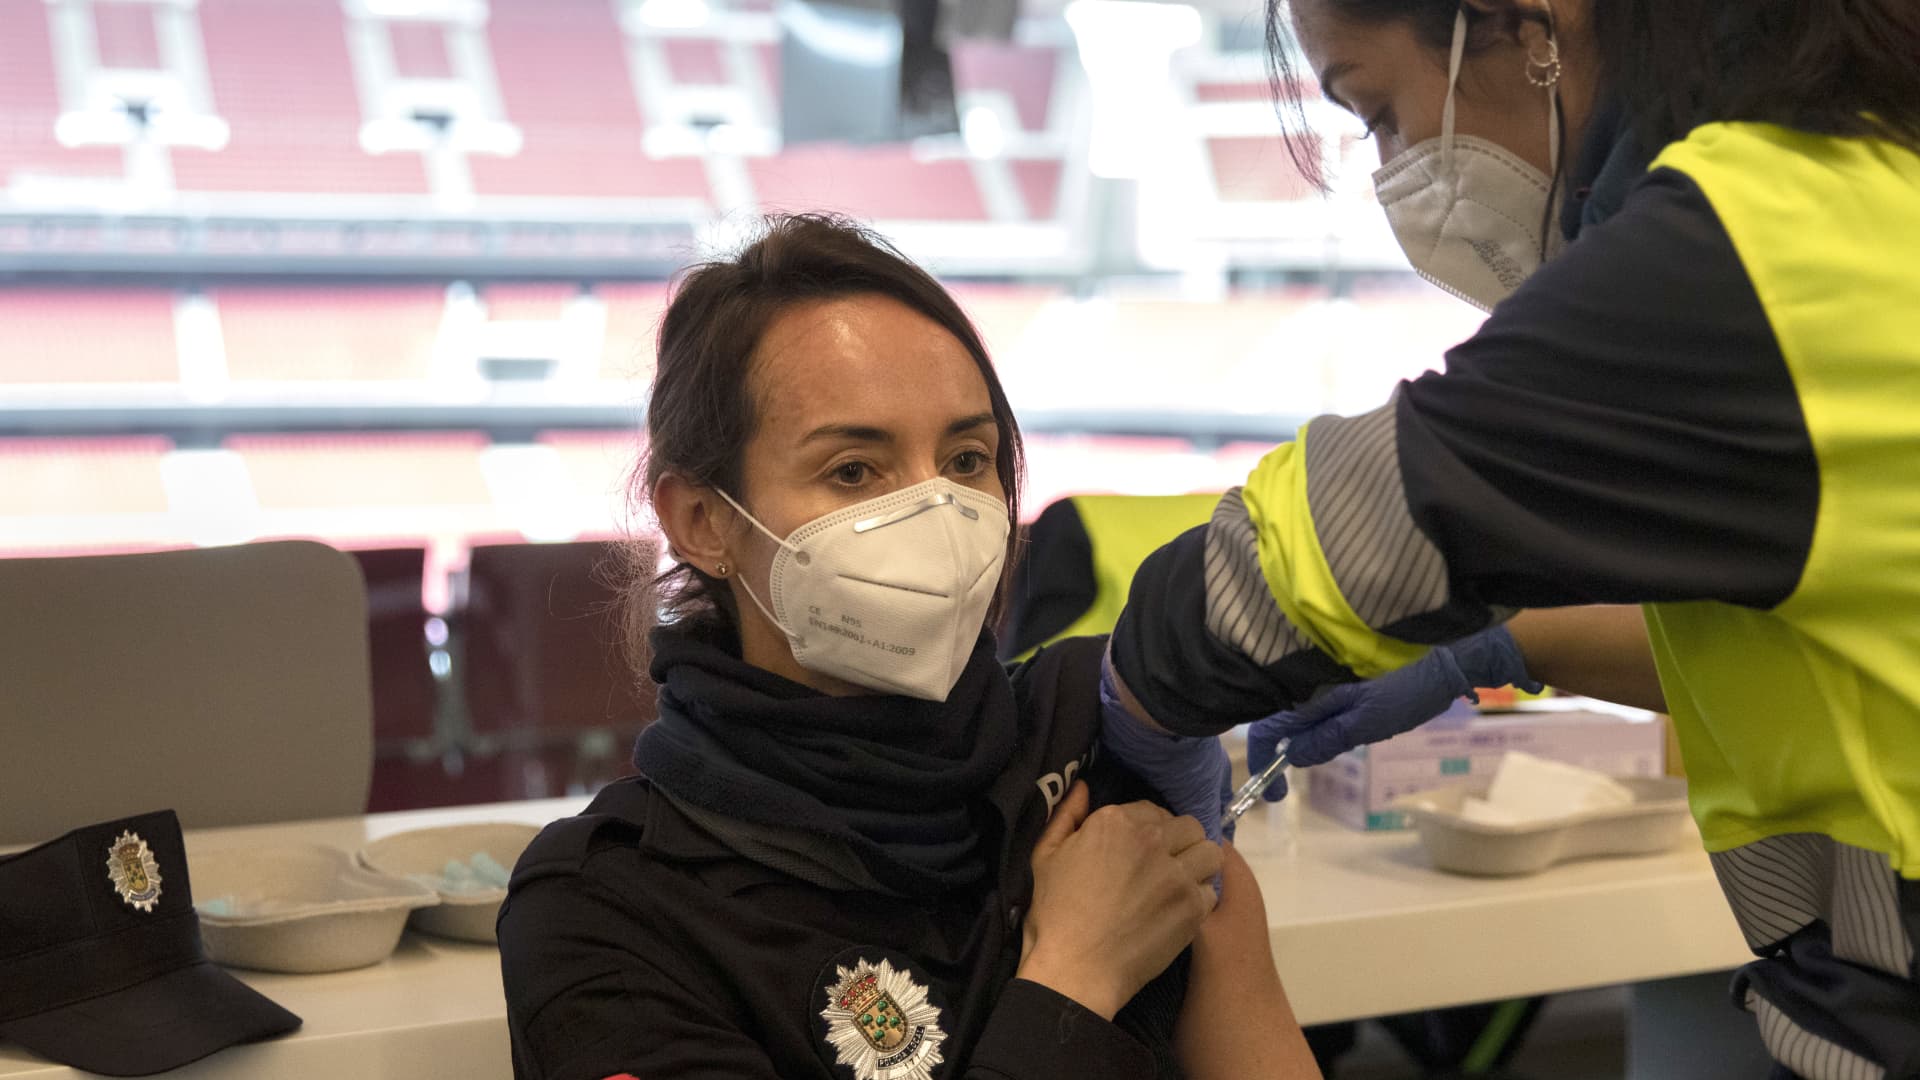 A police officer is vaccinated with AstraZeneca vaccine against Covid-19.